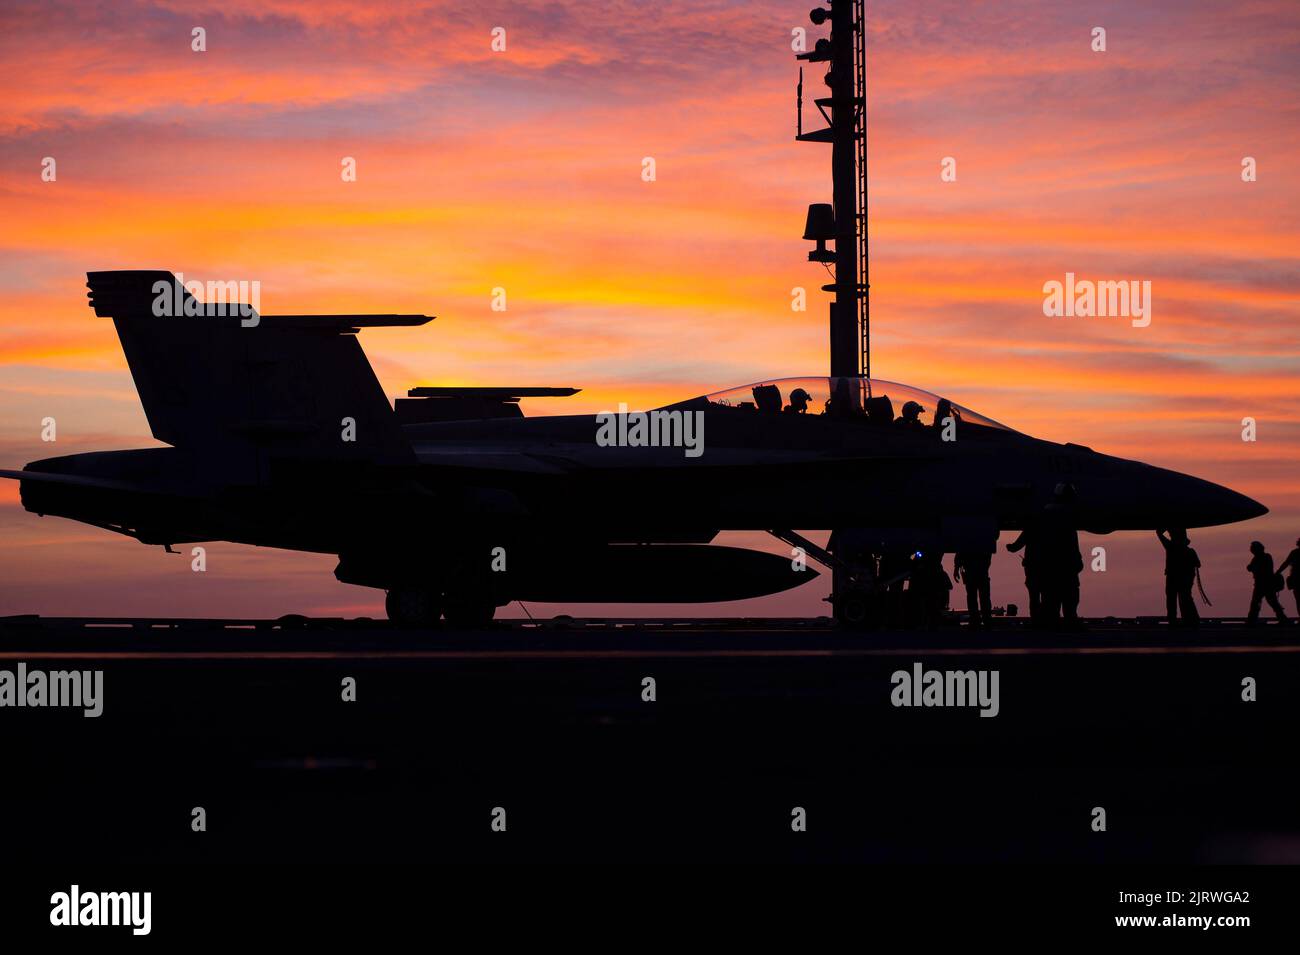 Palma, Spain. 24th Aug, 2022. A U.S. Navy F/A-18F Super Hornet fighter aircraft, attached to the Red Rippers of Strike Fighter Squadron 11 prepares to take off at sunset from the flight deck of the Nimitz-class aircraft carrier USS Harry S. Truman during NATO operations, August 24, 2022 off the coast of Mallorca, Spain. Credit: MC3 Hunter Day/U.S. Navy/Alamy Live News Stock Photo